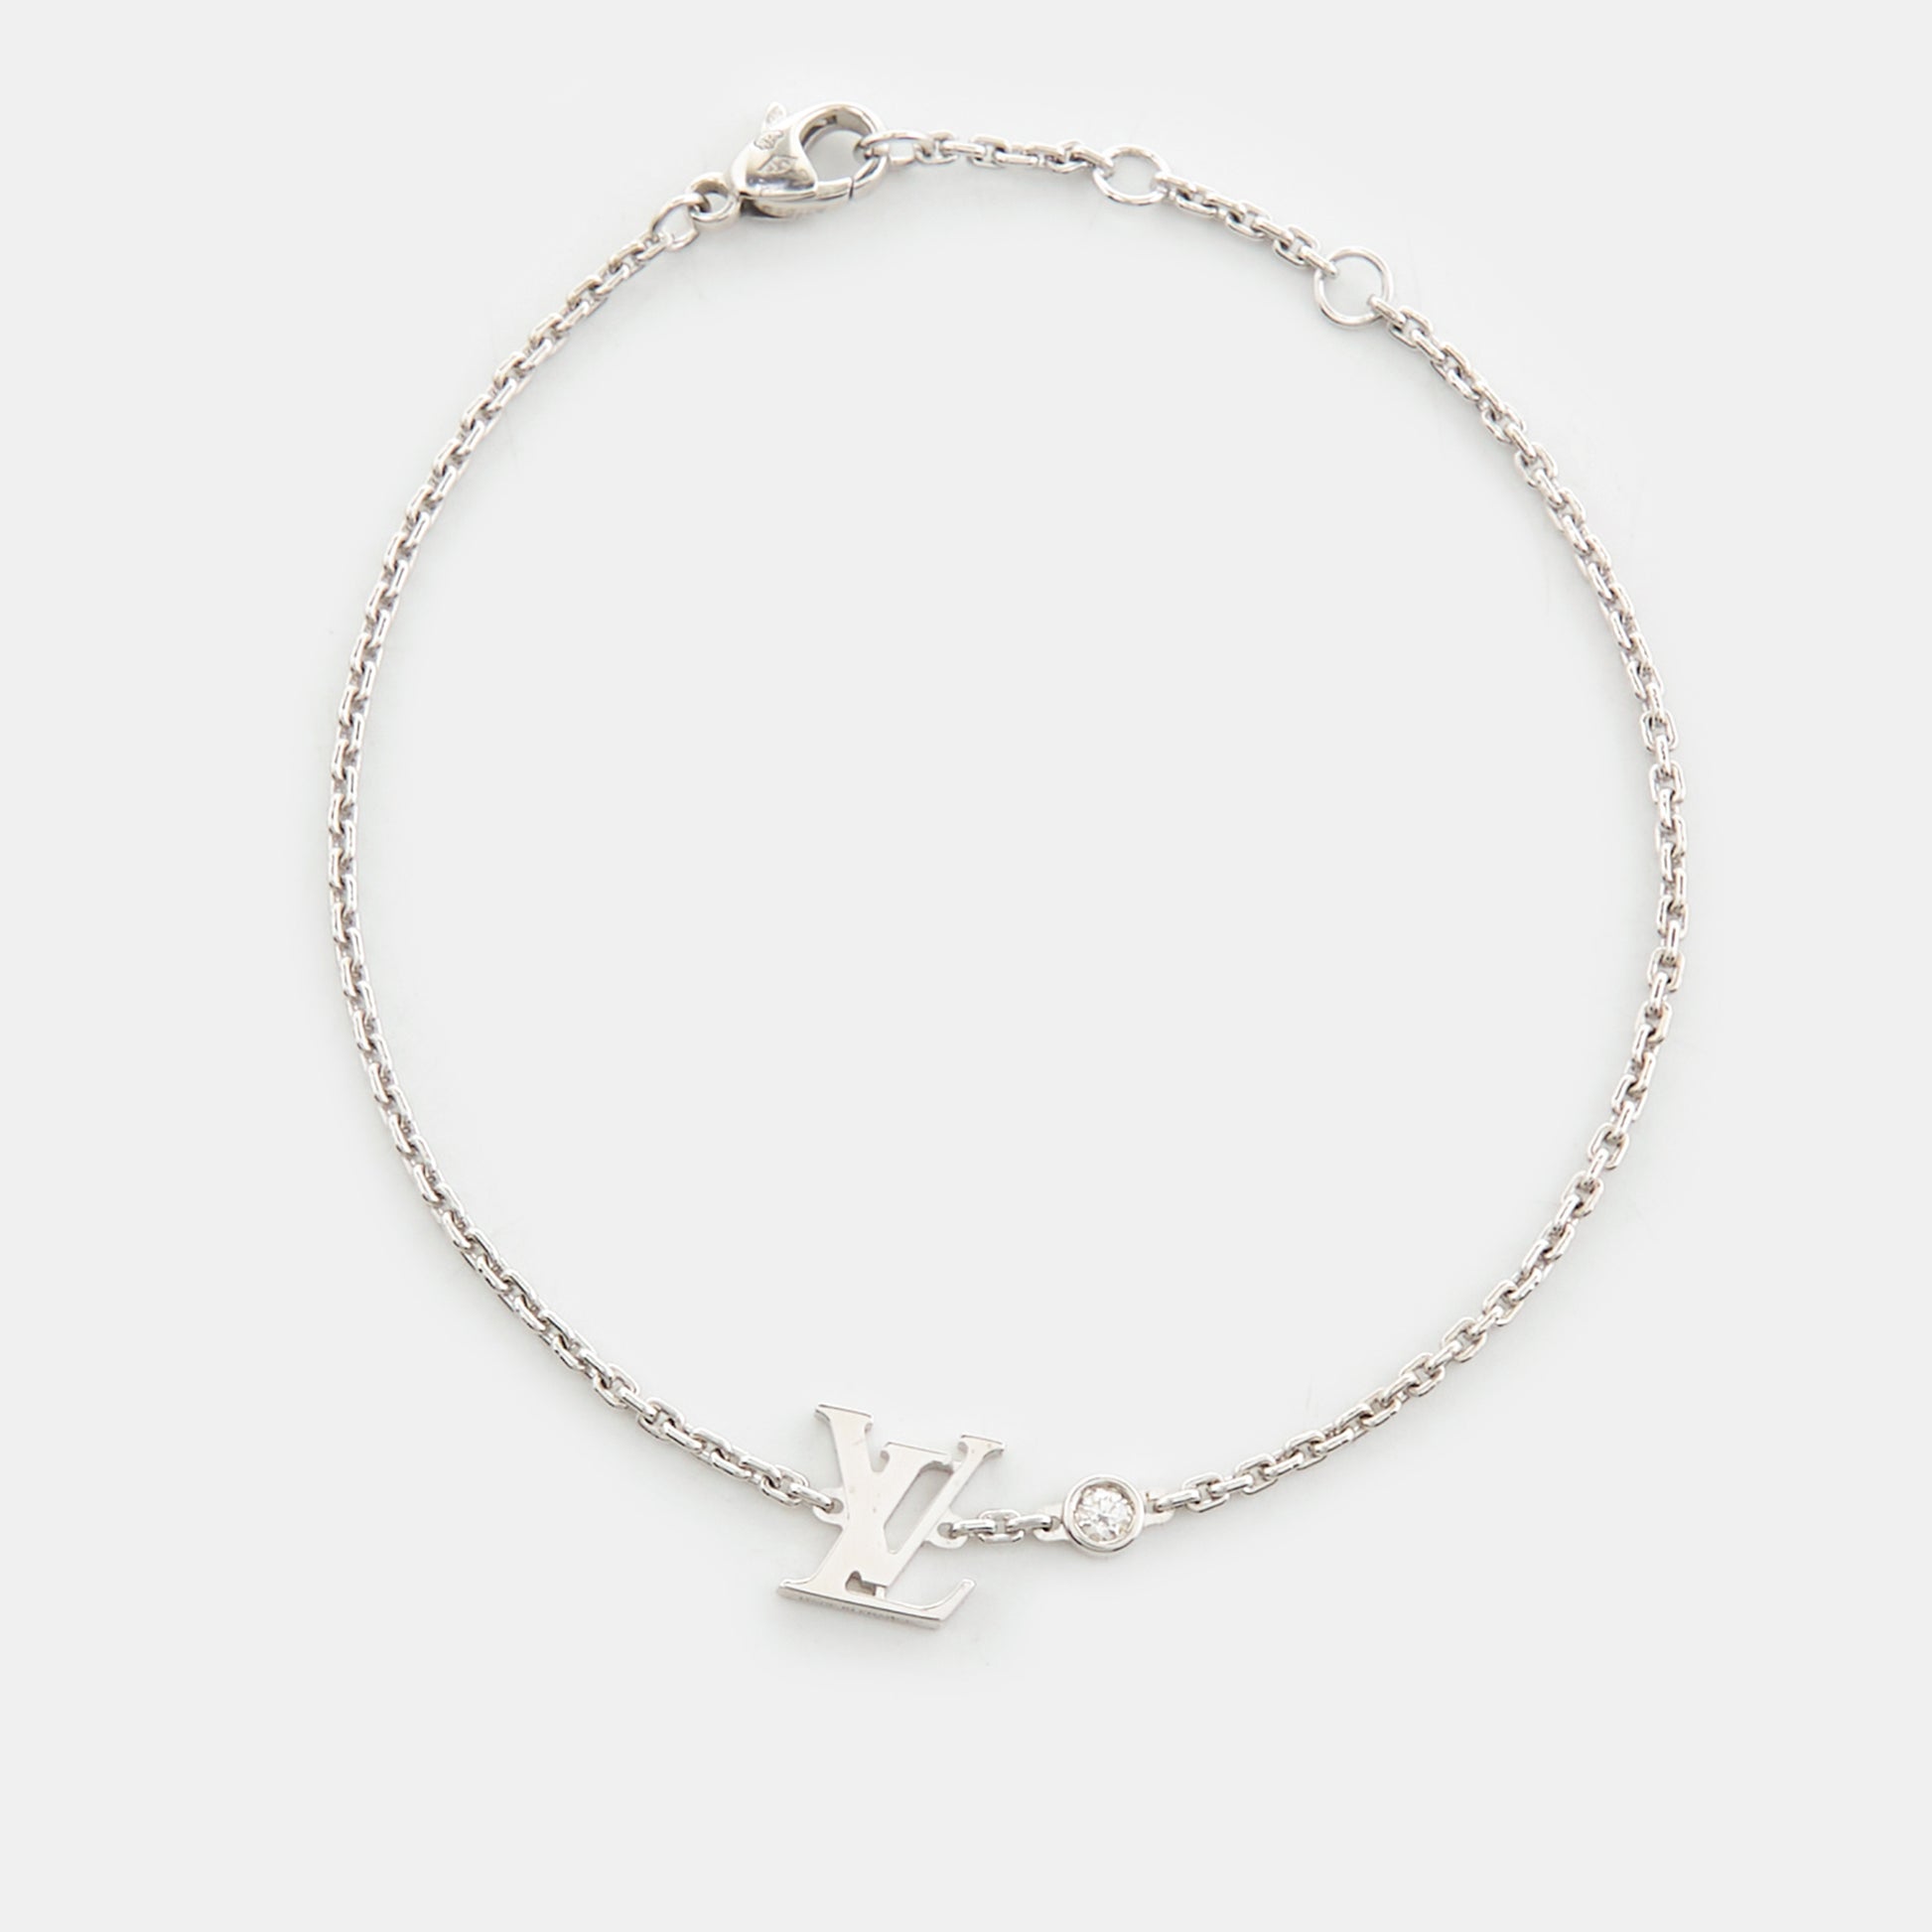 Louis Vuitton - Authenticated Idylle Blossom Bracelet - White Gold Silver for Women, Very Good Condition